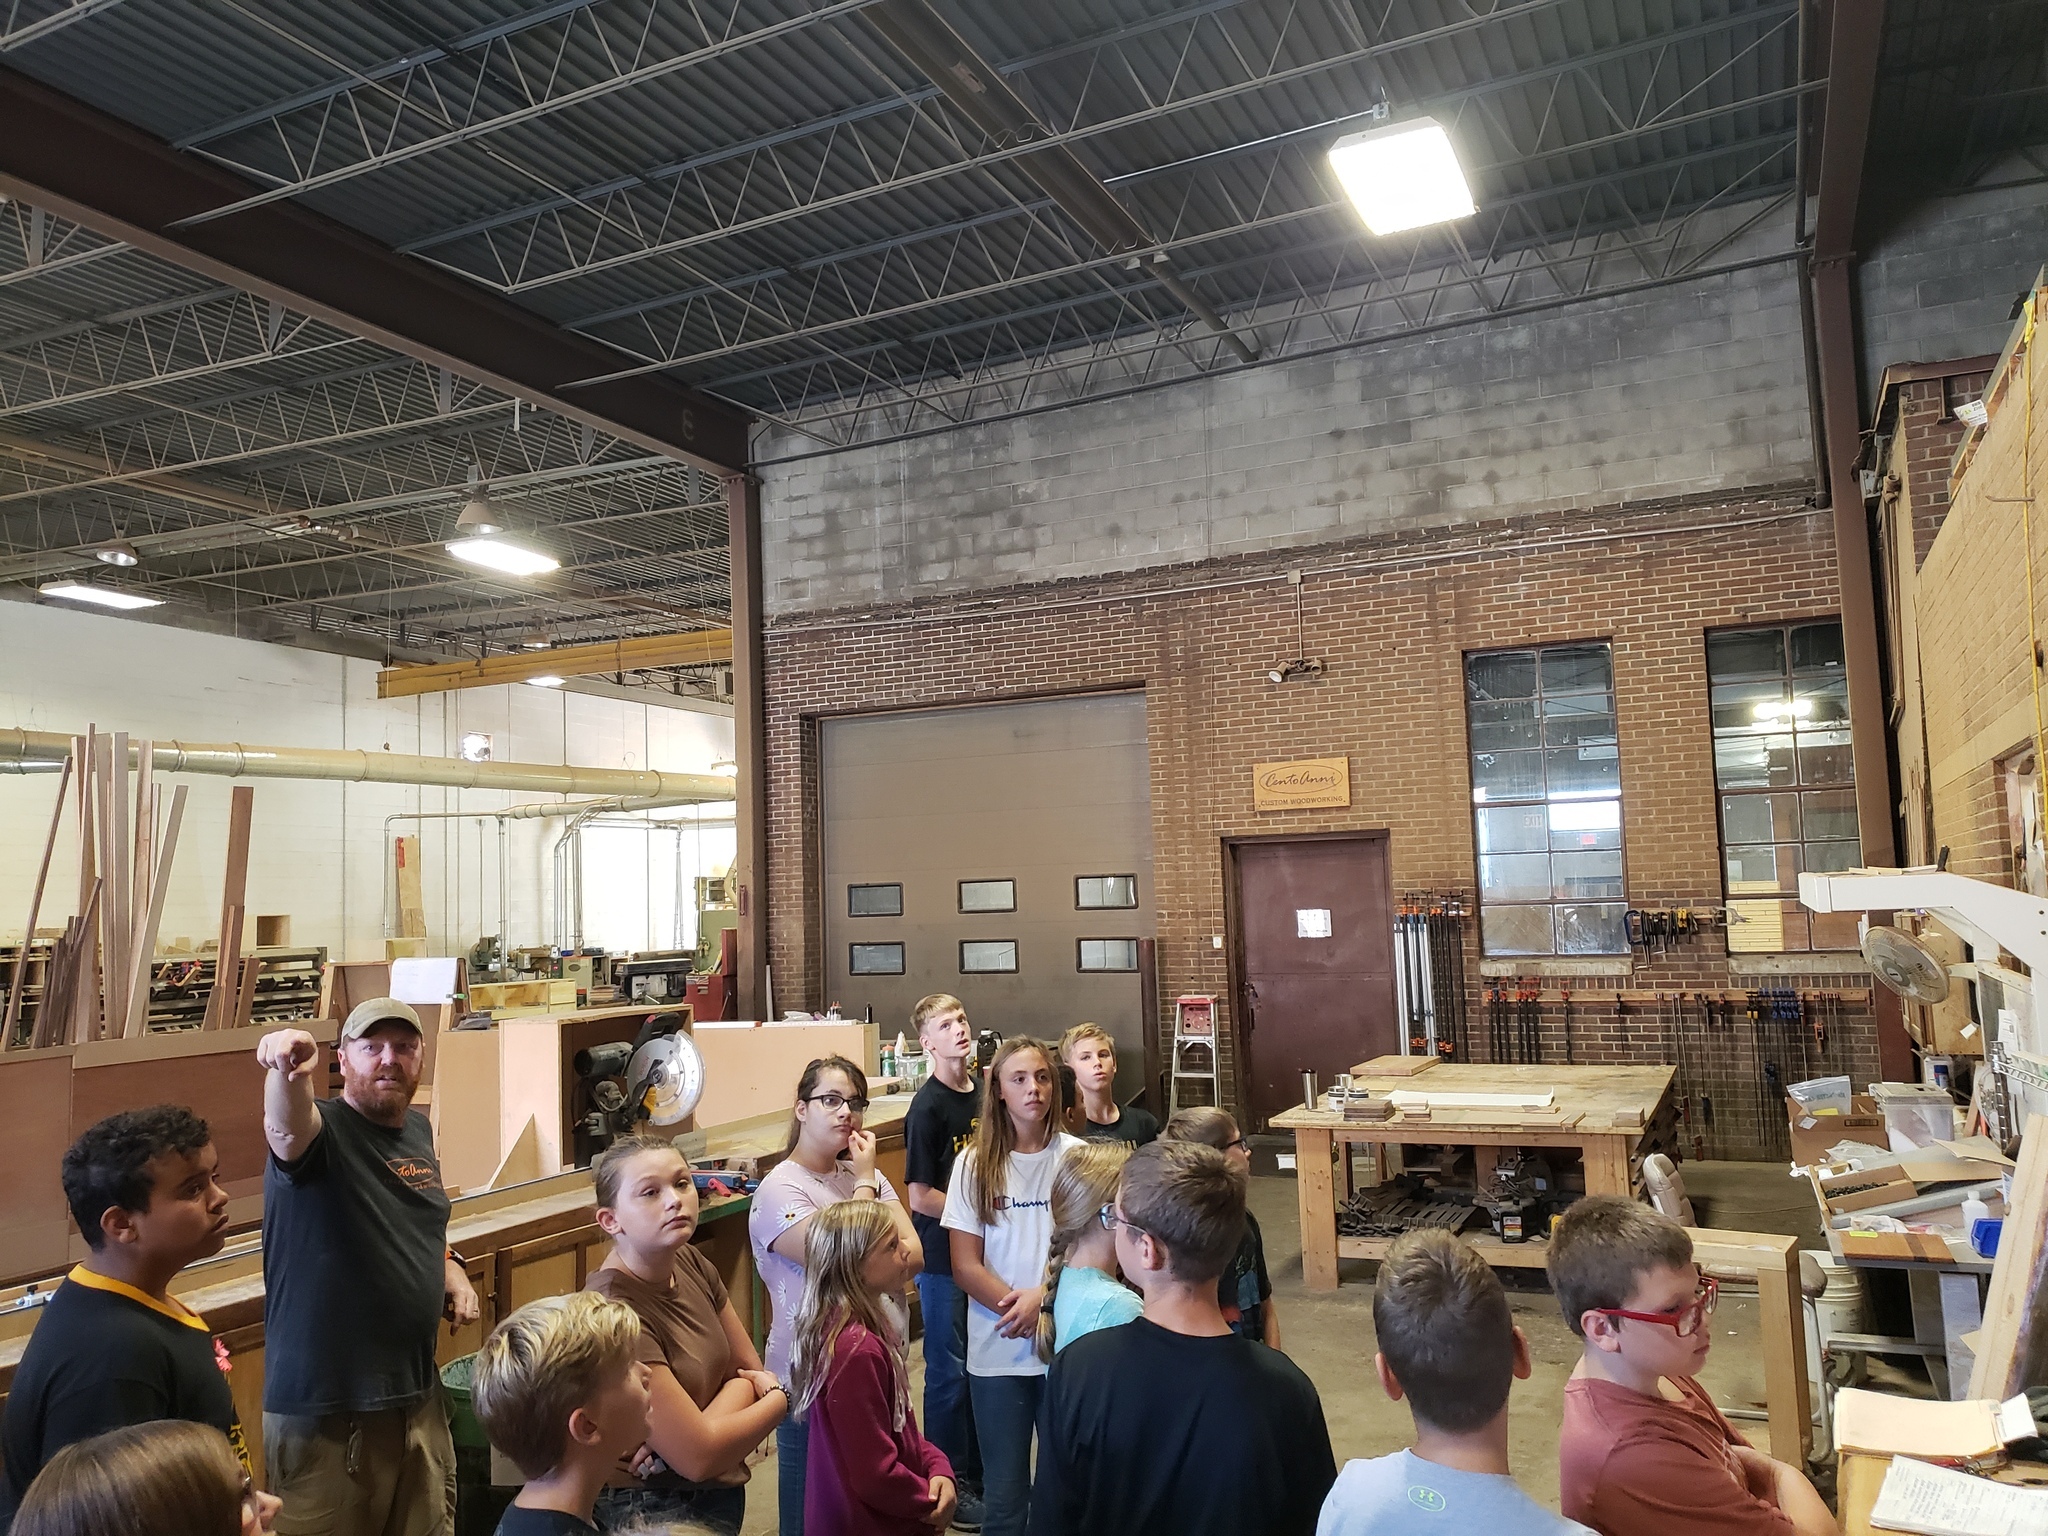 Sixth Grade tour to Cento Anni Woodworking 9/21/22